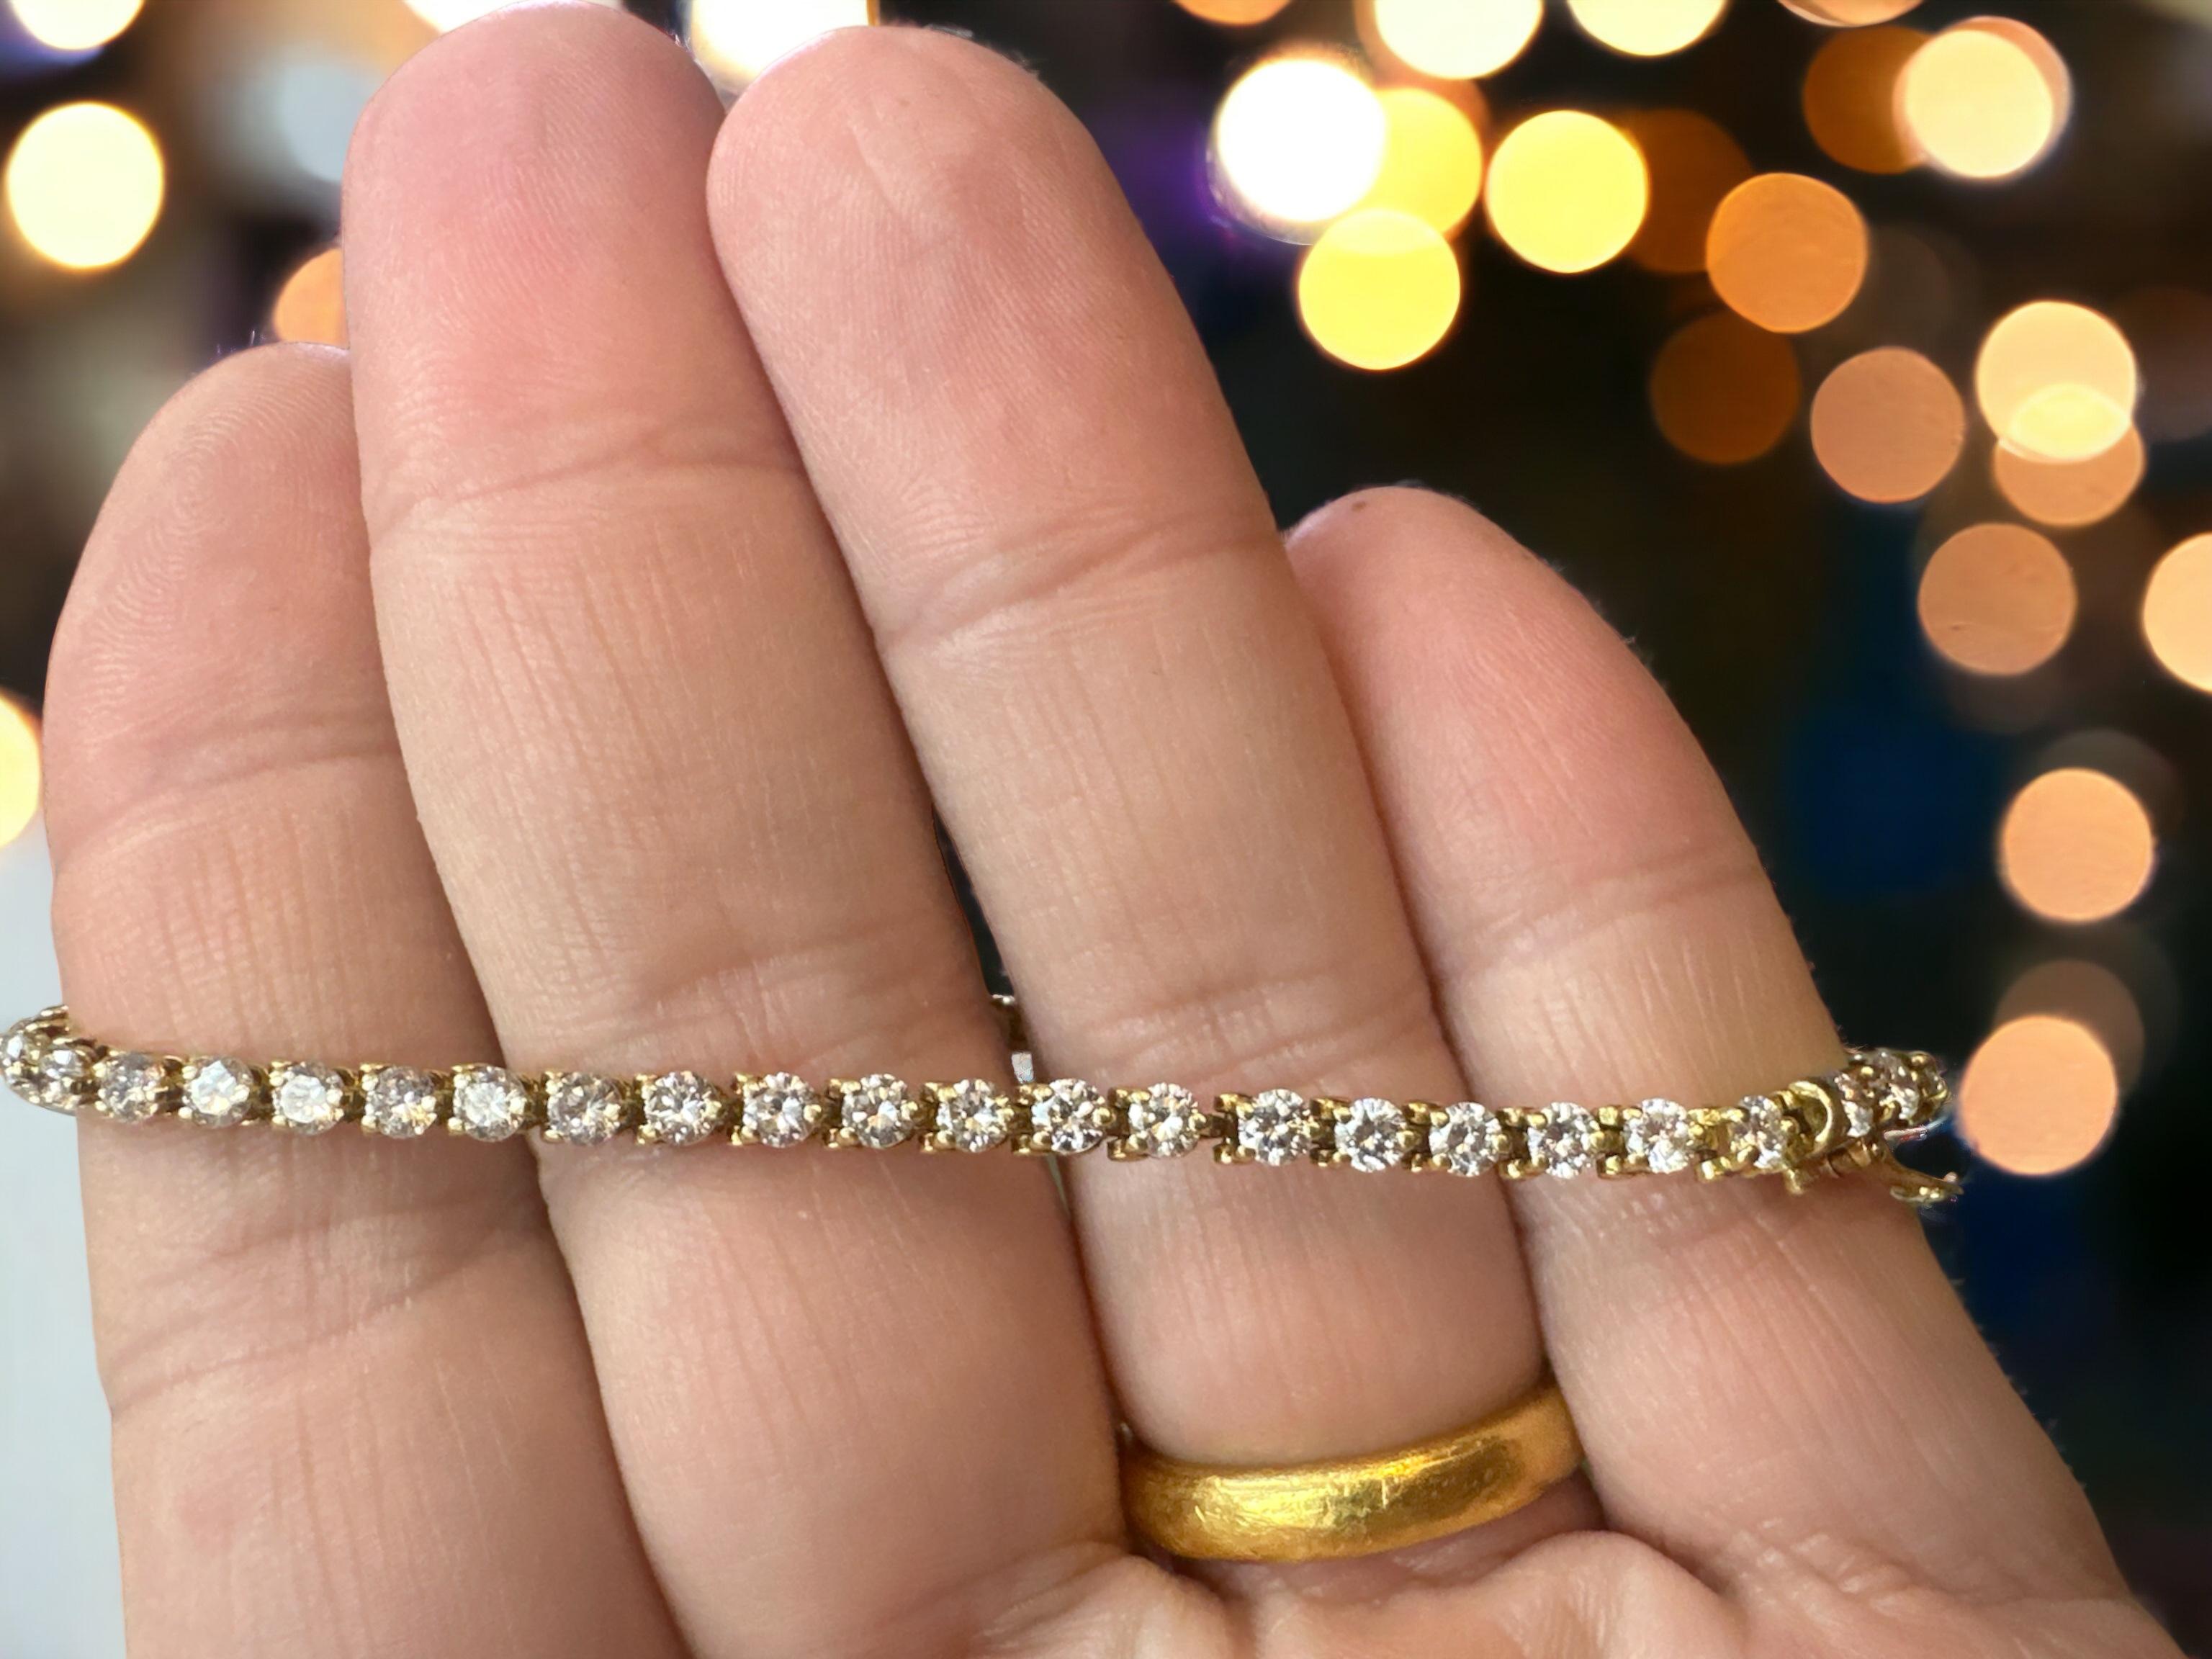 For sale is a stunning Cartier 1980s diamond tennis bracelet in 18kt yellow gold, a true masterpiece of luxury and elegance. This exquisite piece of jewelry exudes timeless sophistication and is sure to captivate anyone with a discerning eye for